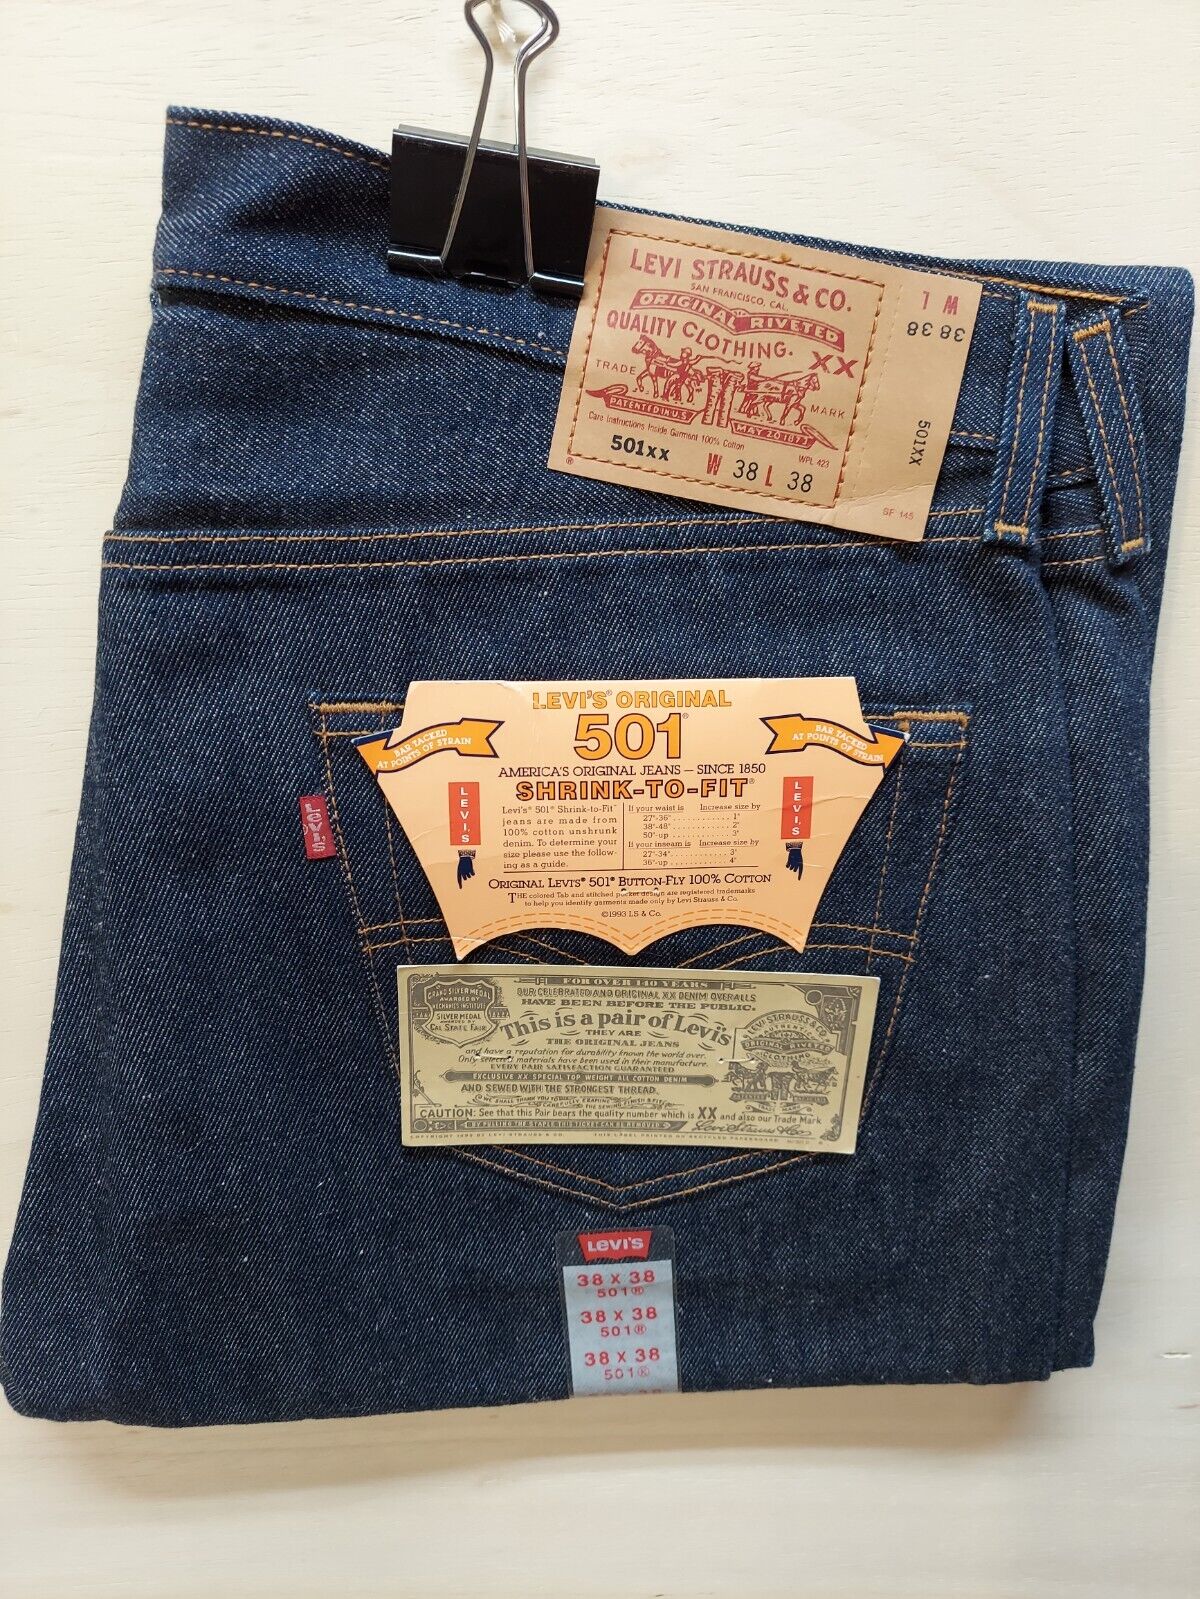 Vintage Levi's Shrink-To-Fit 501xx Blue Jeans, 38 x 38, NWT, NOS, Deadstock